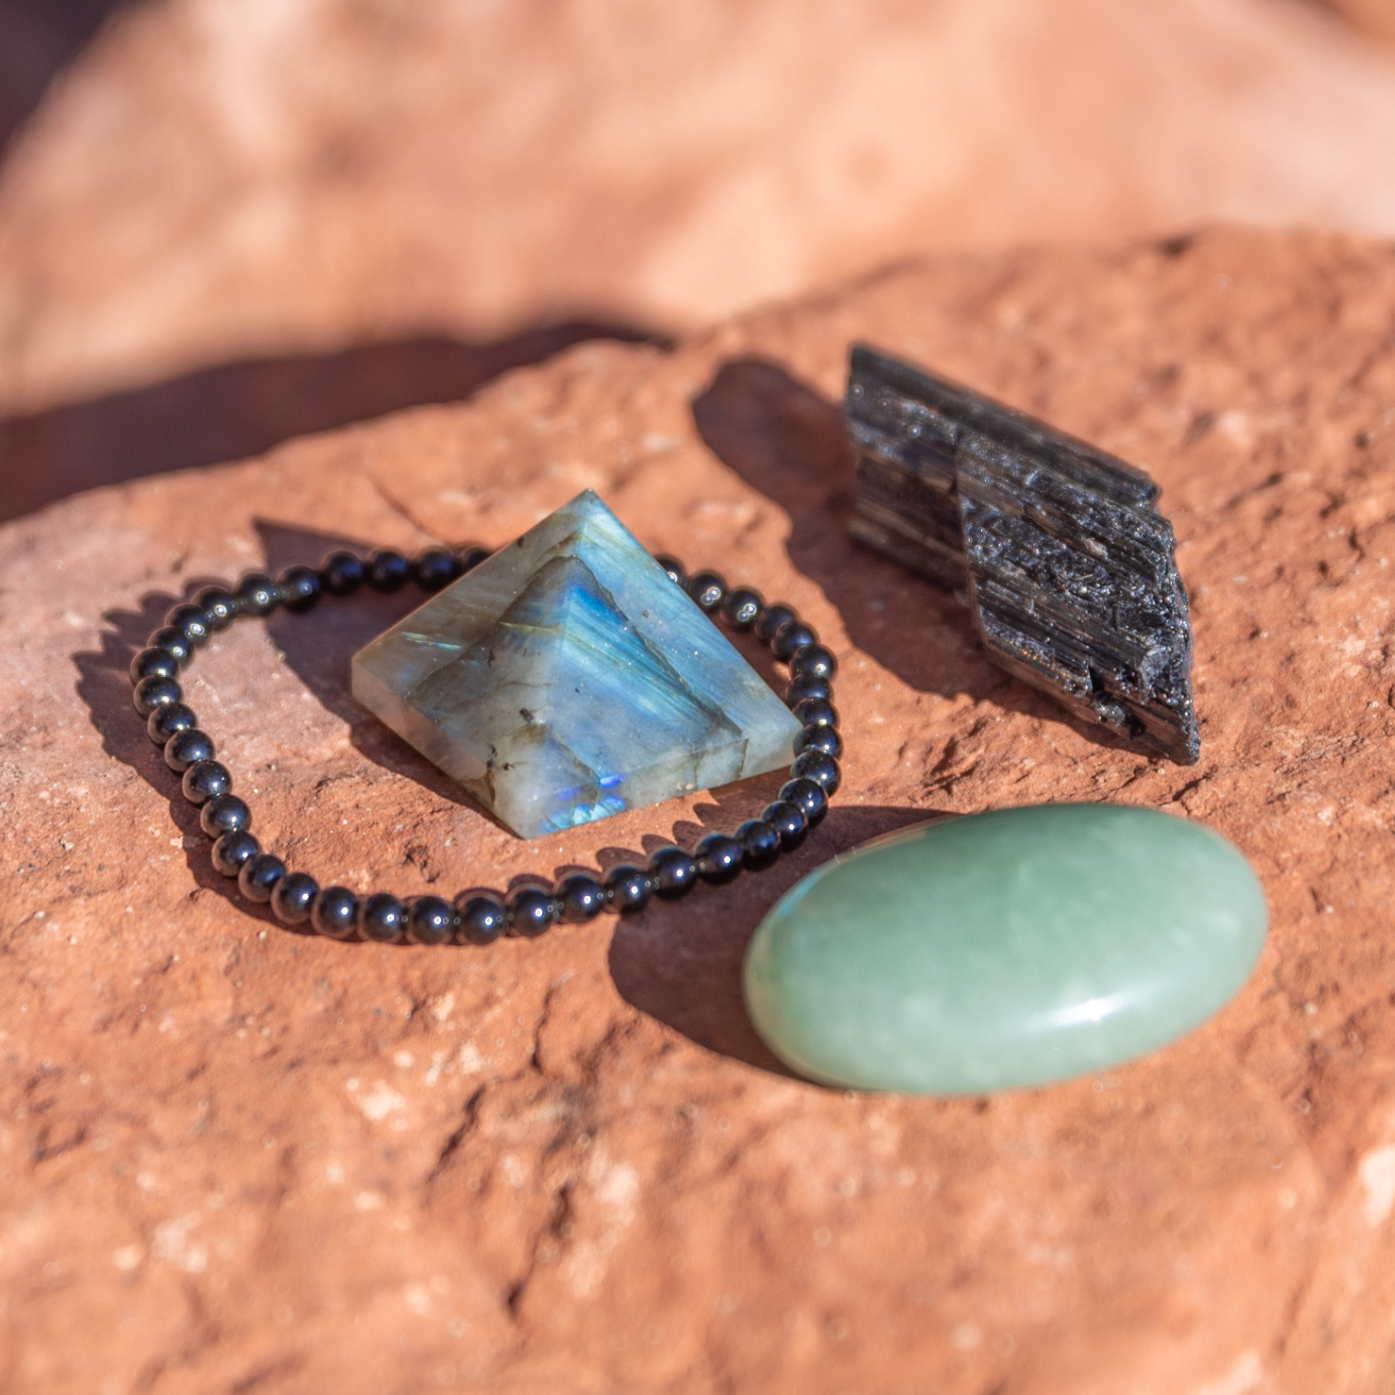 healing crystals: a bundle of crystals used for protection in sedona, arizona